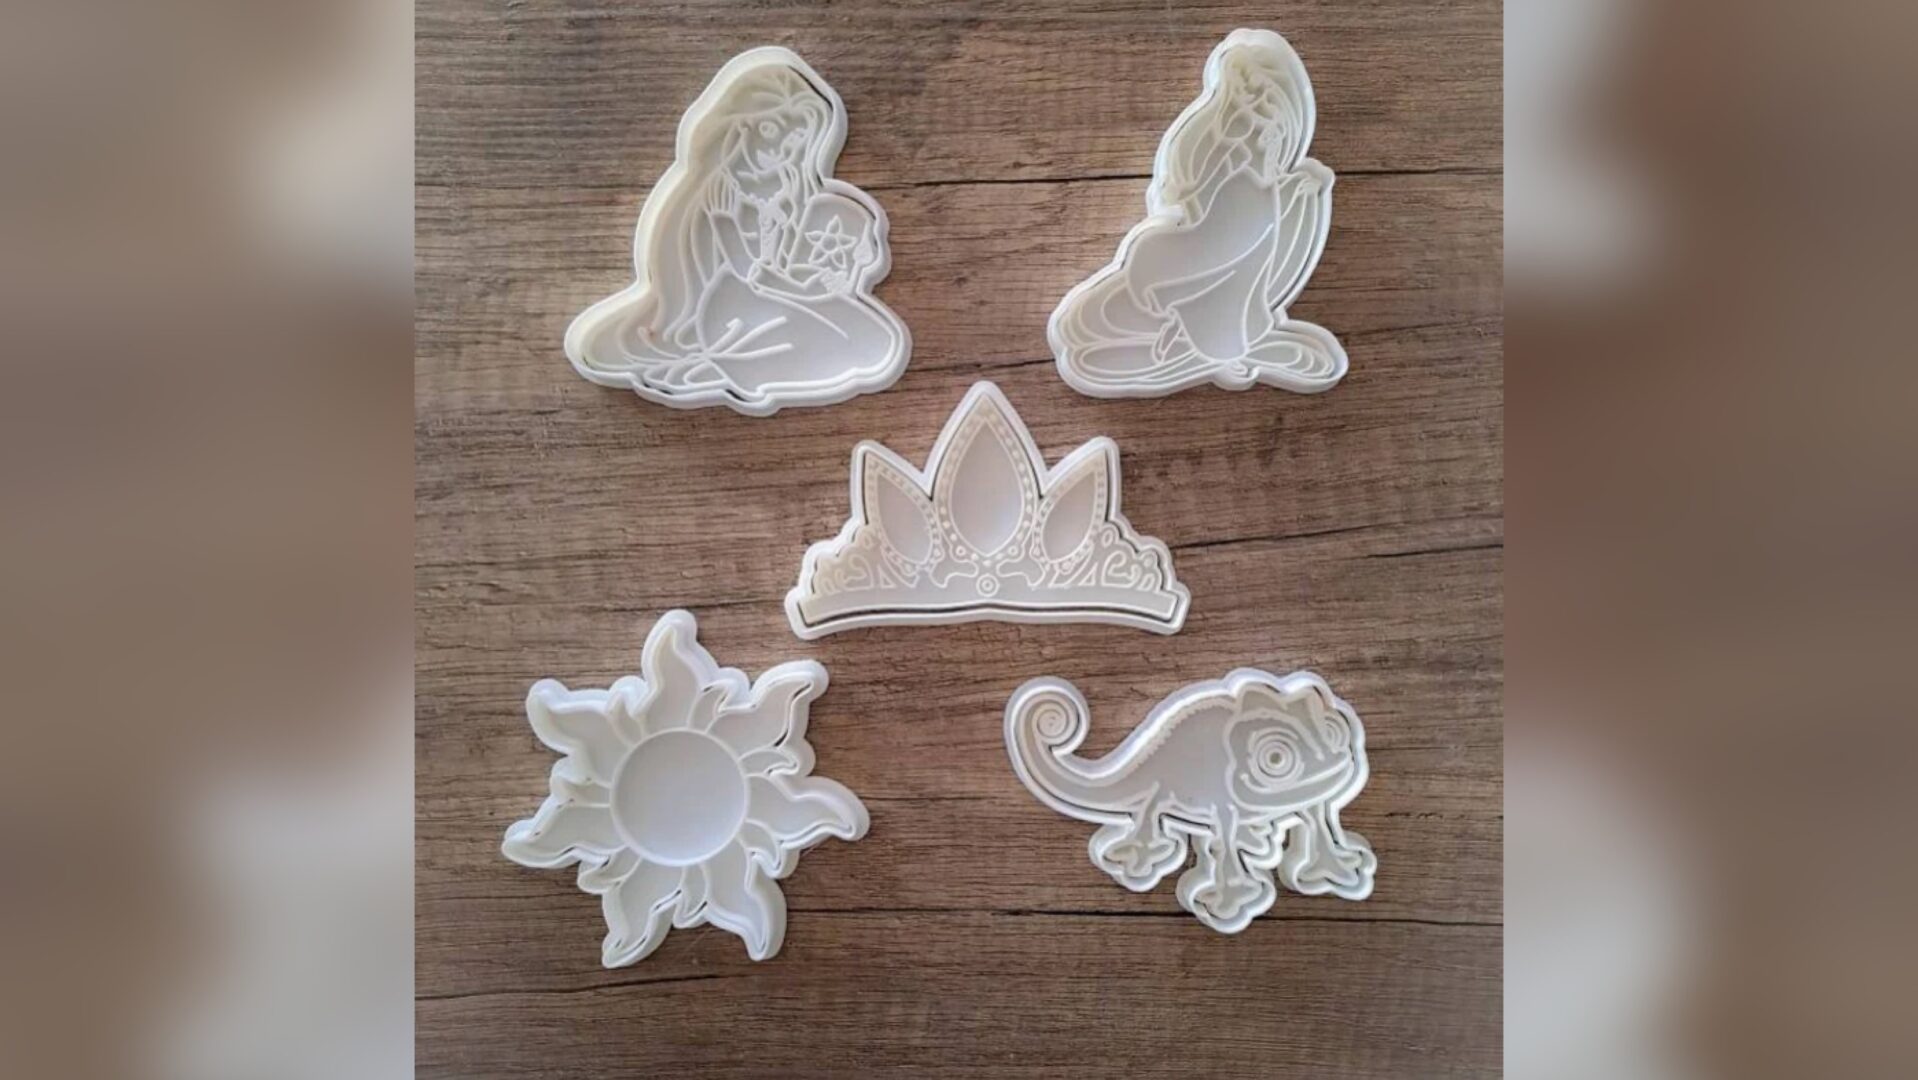 Bake Your Favorite Cookies With These Tangled Cookie Cutters!